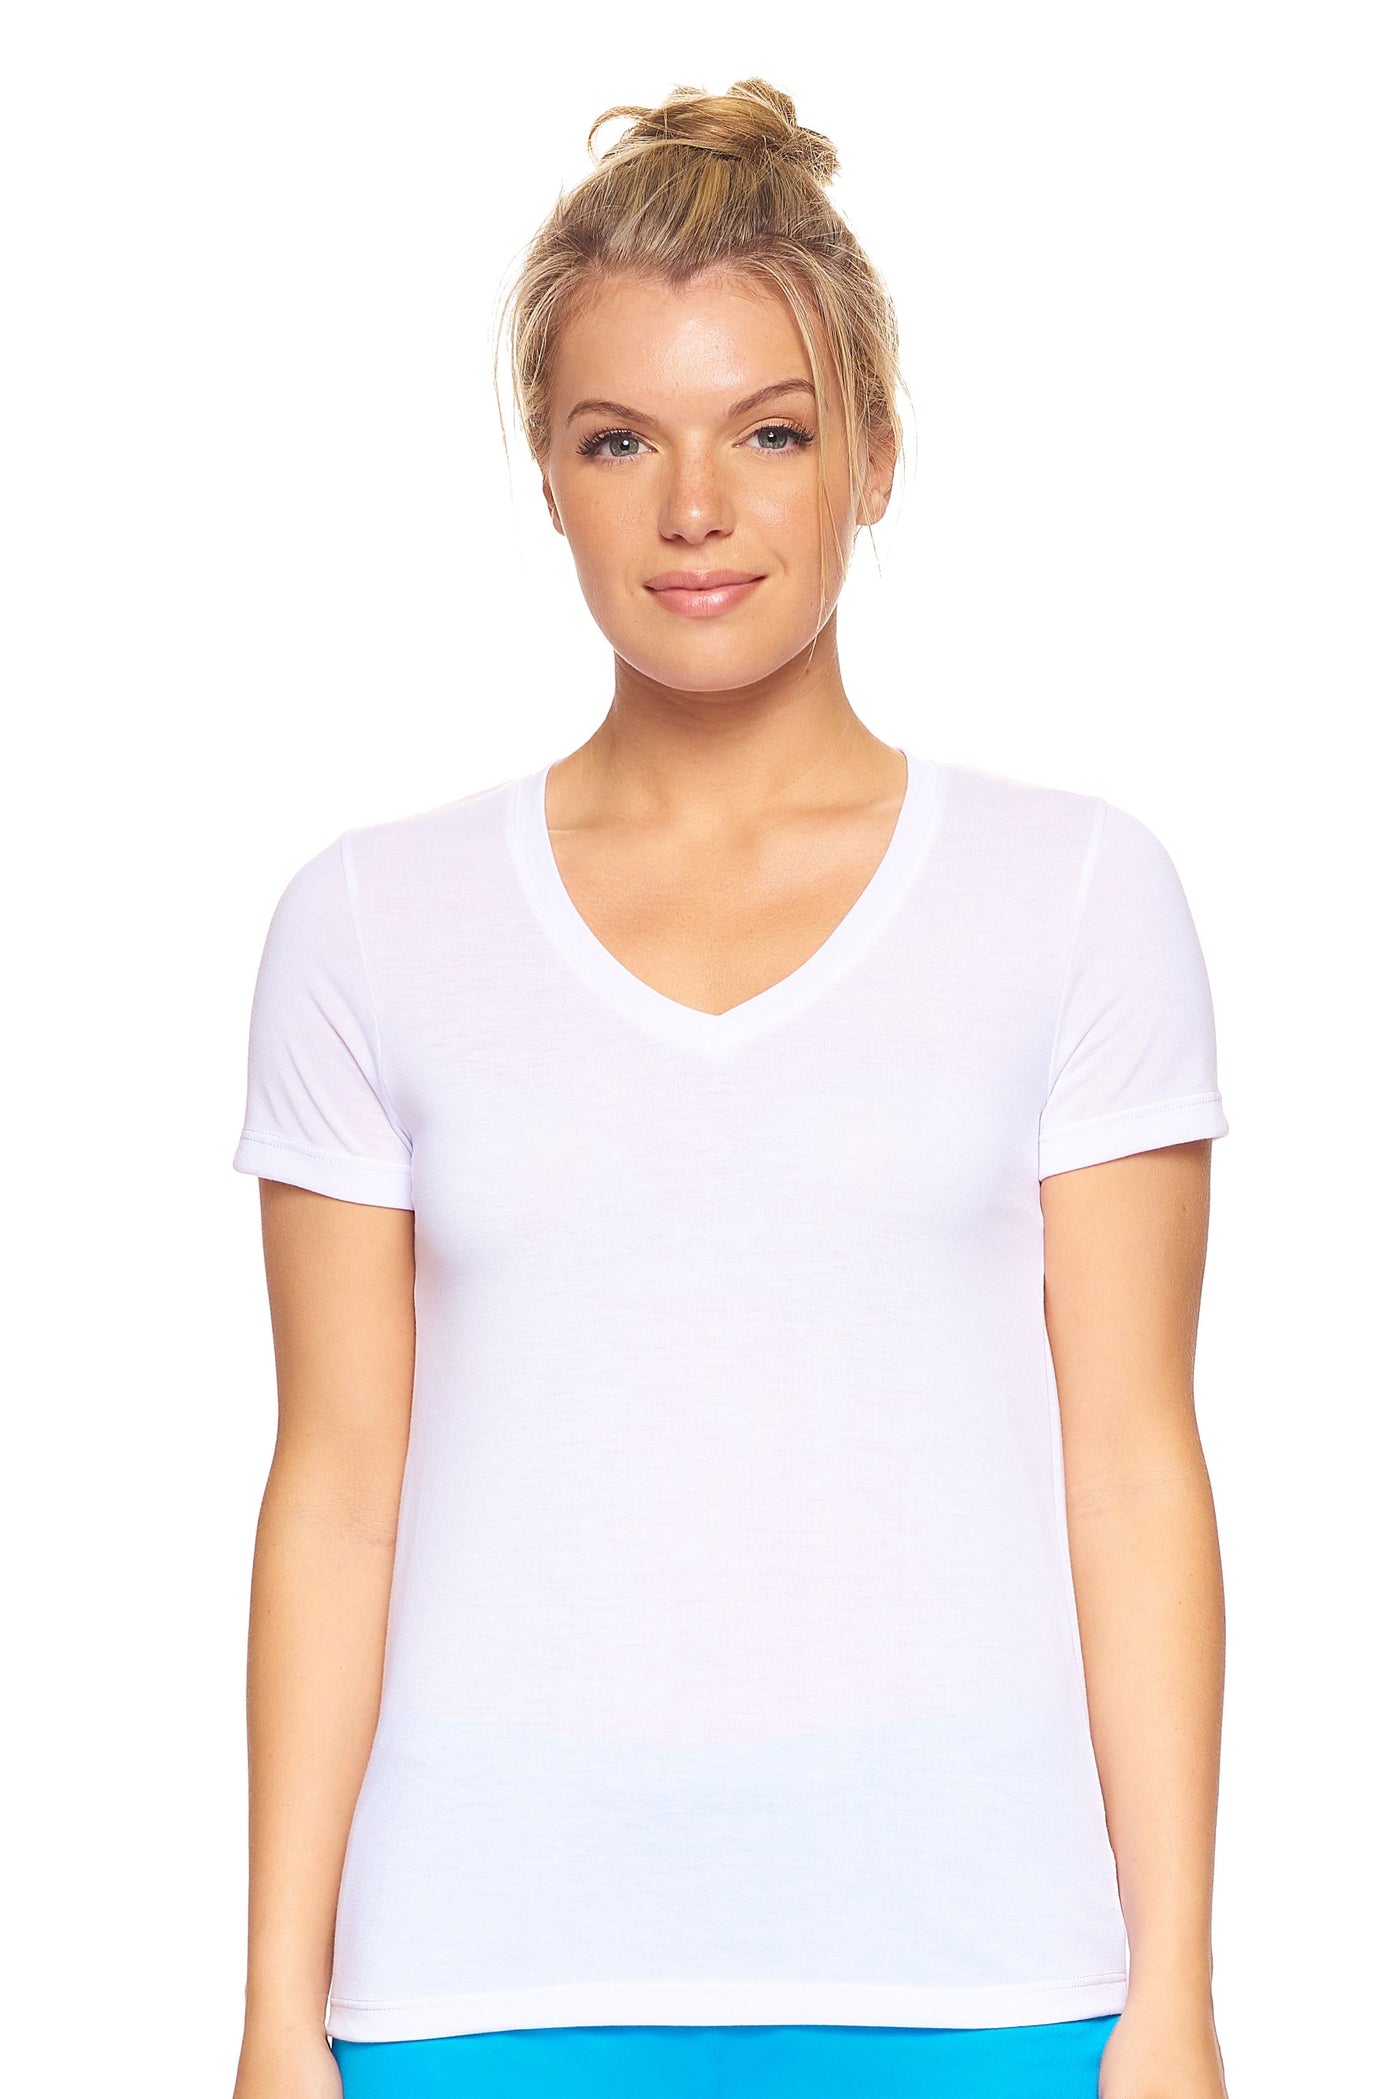 Expert Brand Retail Soft Eco-Friendly Women's Sportswear Women's Scoop Neck Shirt Made in USA white#color_white